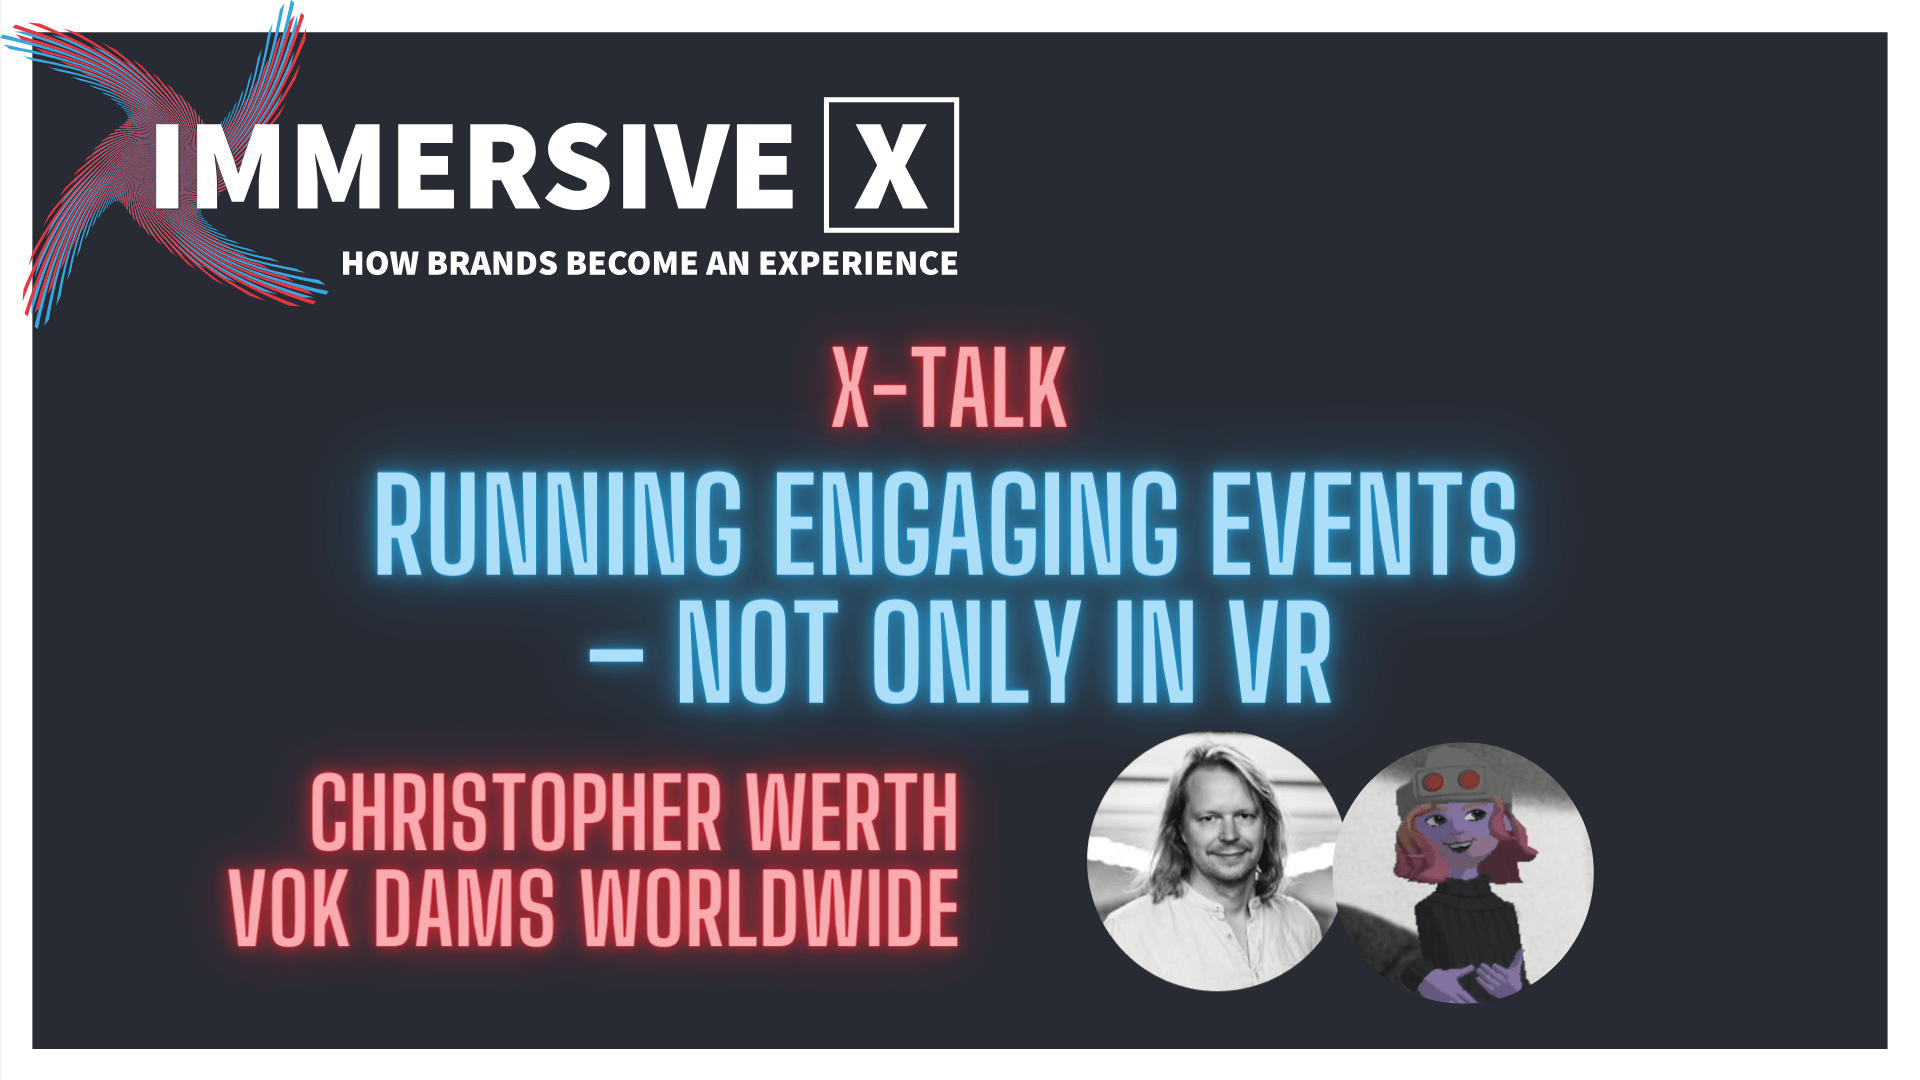 Running Engaging Events - not only in VR